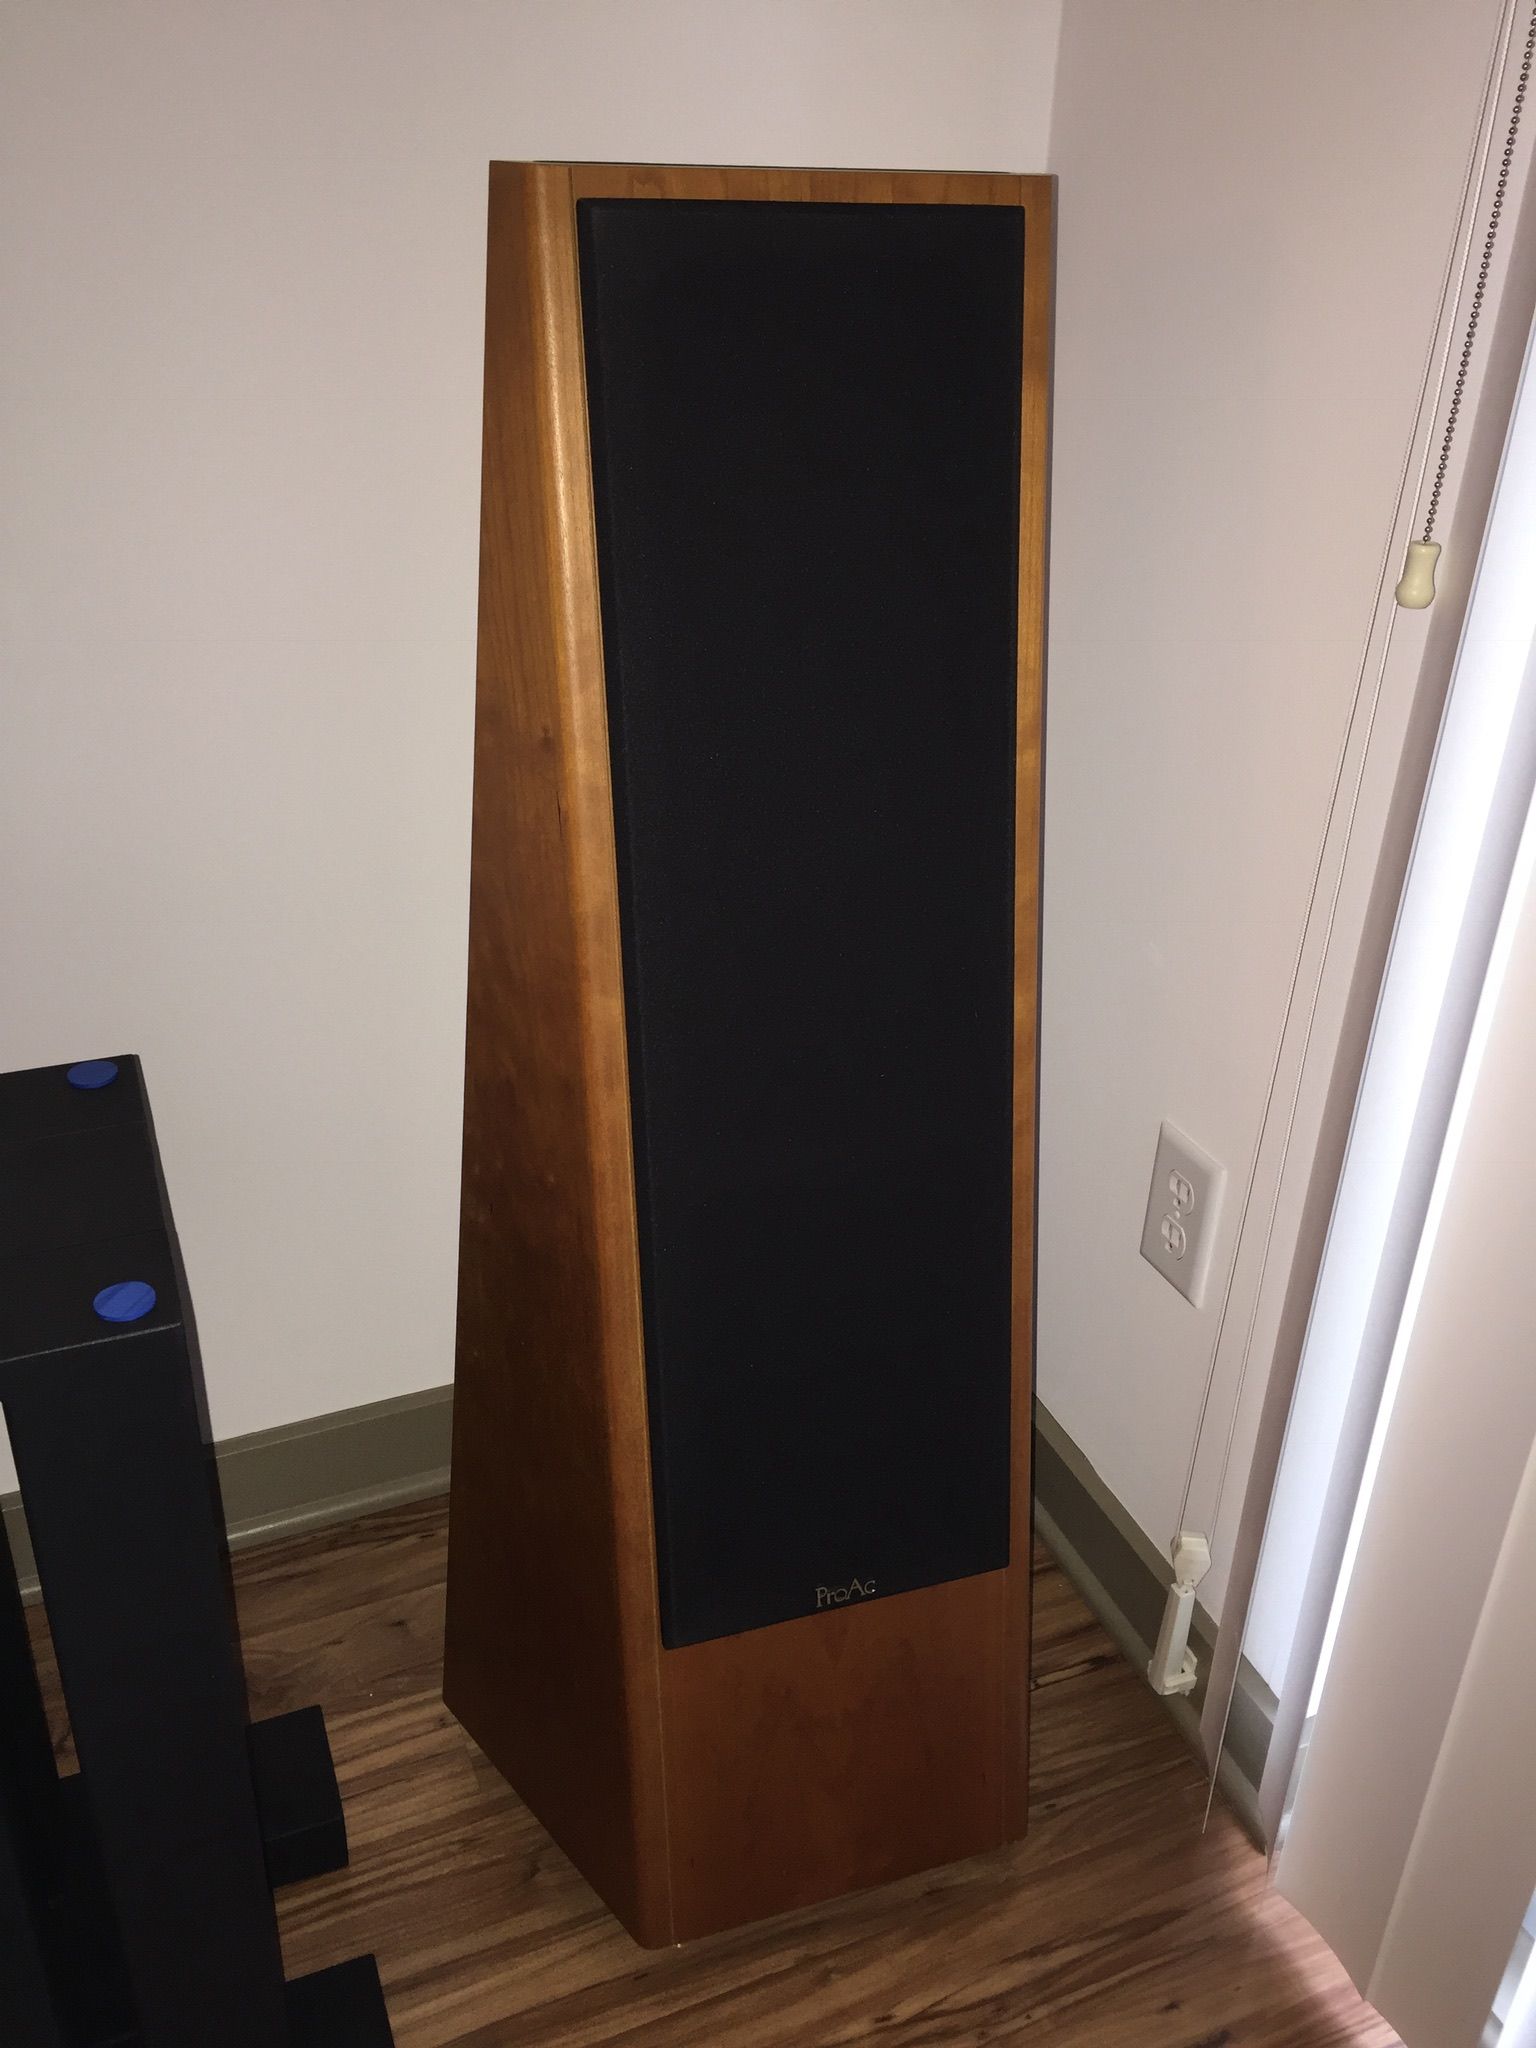 Proac Future Point 5 REDUCED! 3